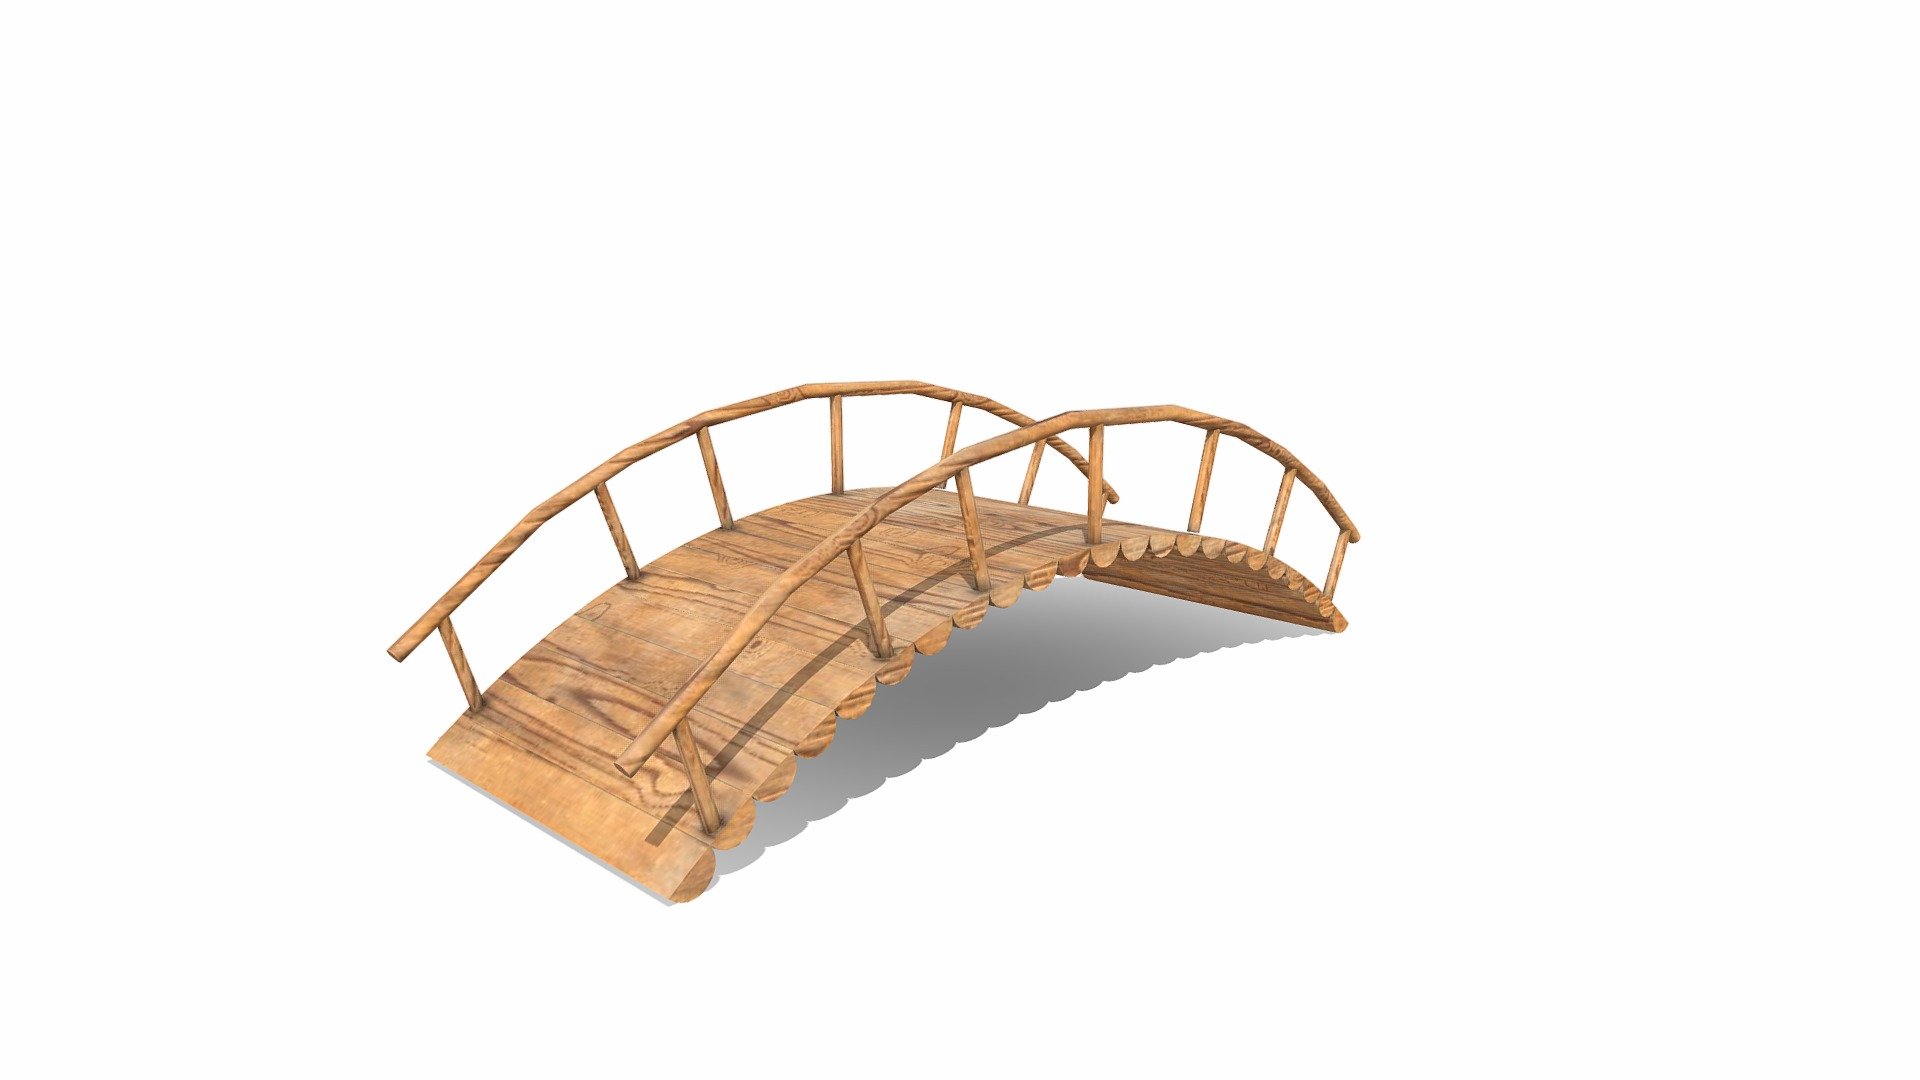 This is a wooden bridge. It's been modled to look like its made of logs - Wooden bridge - Download Free 3D model by Leiona Chung (@LeionaChung) 3d model